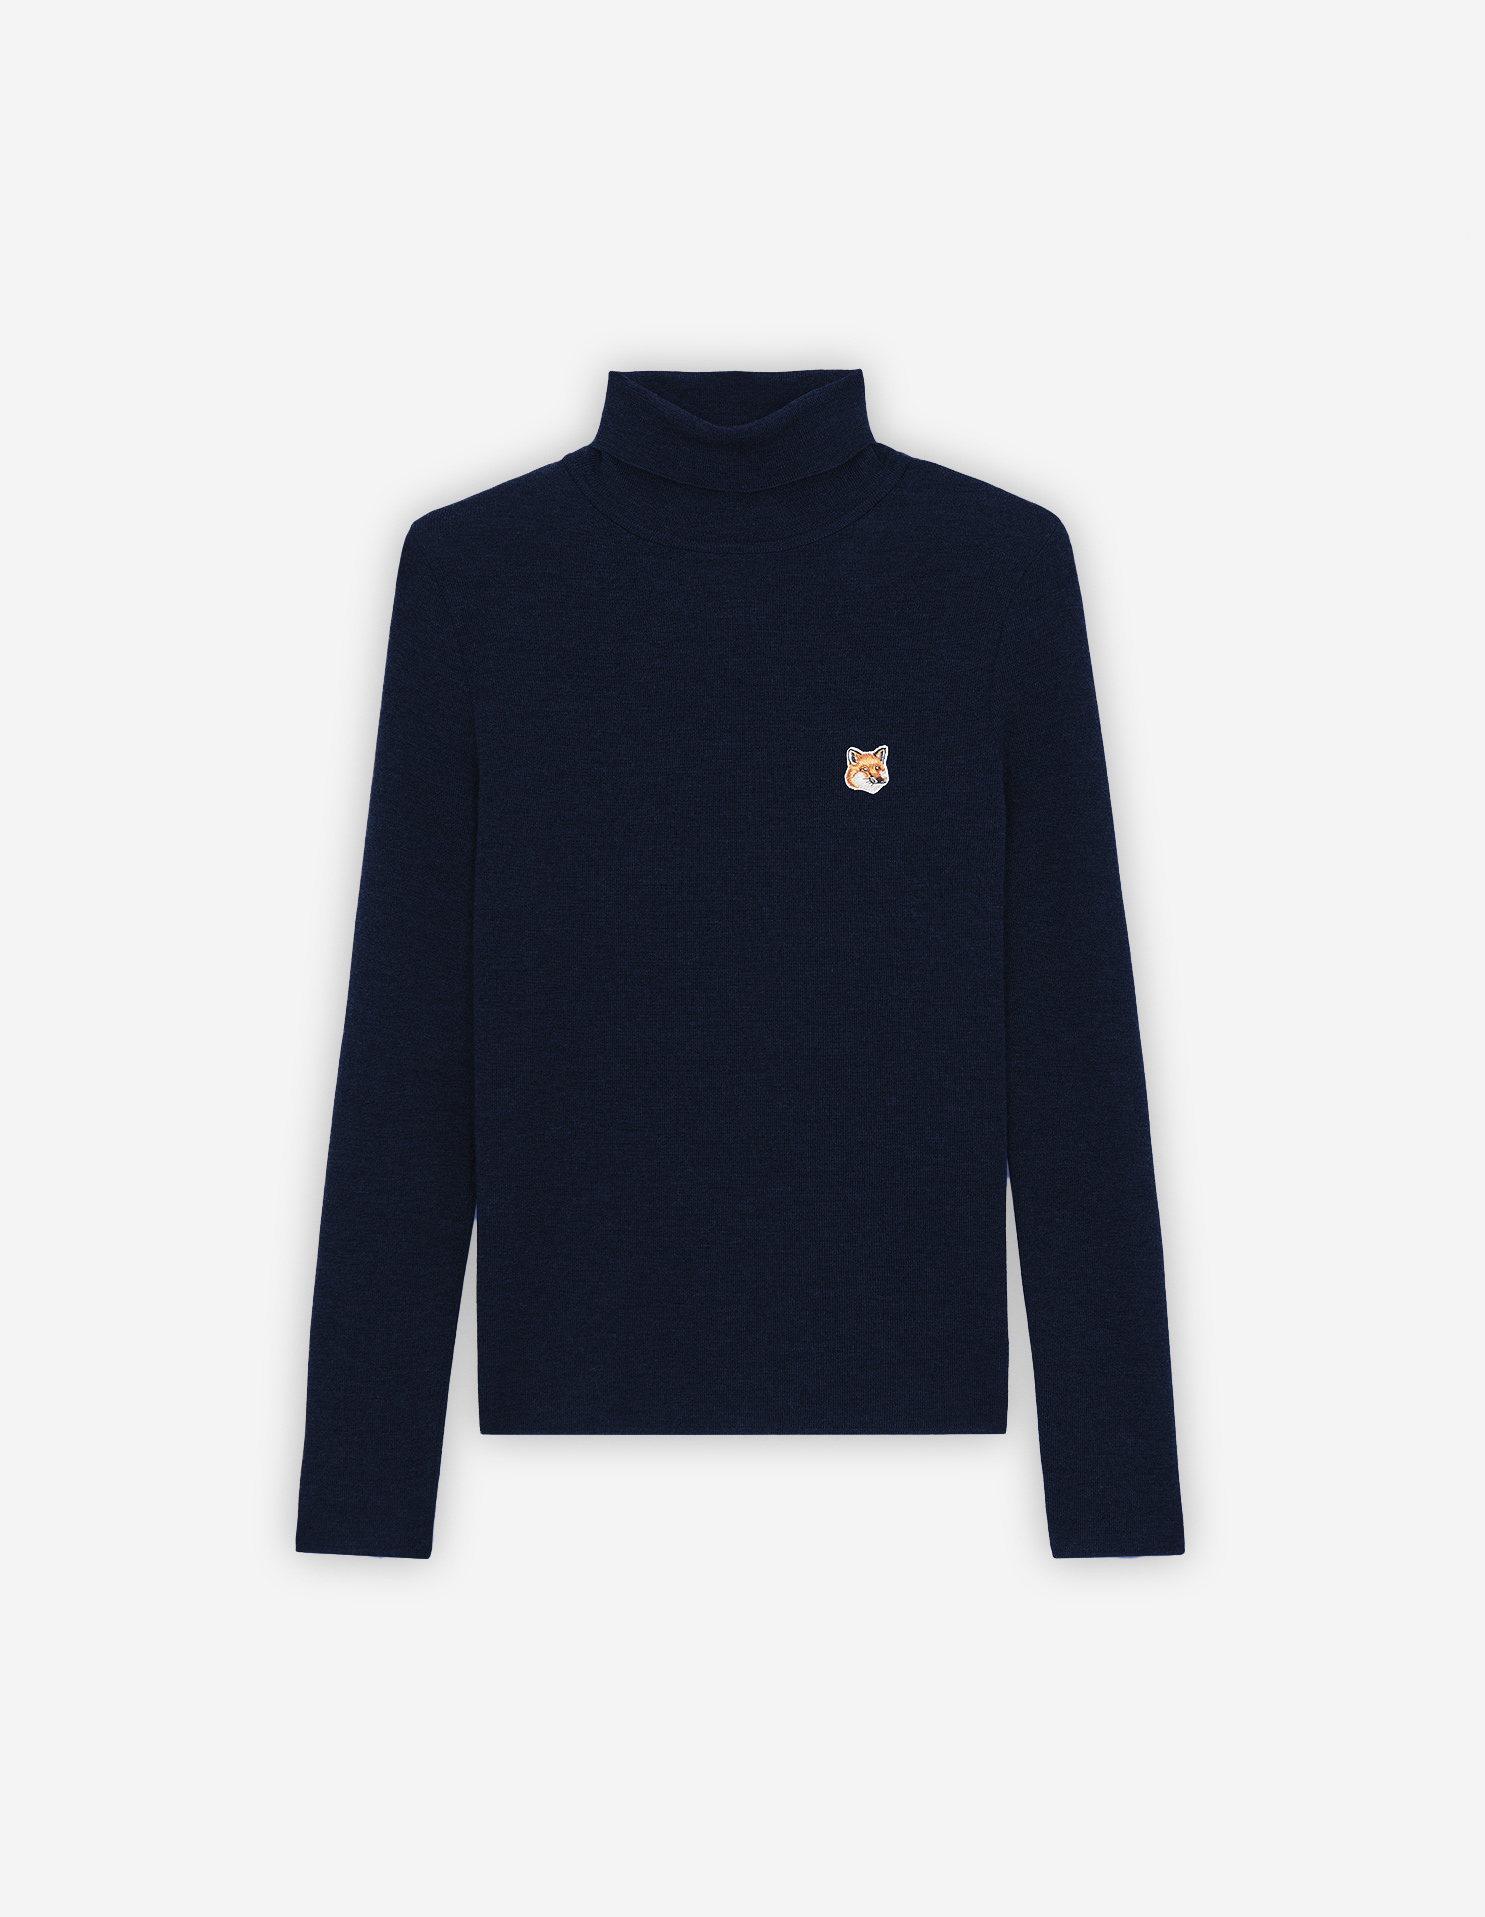 FOX HEAD PATCH FITTED TURTLENECK